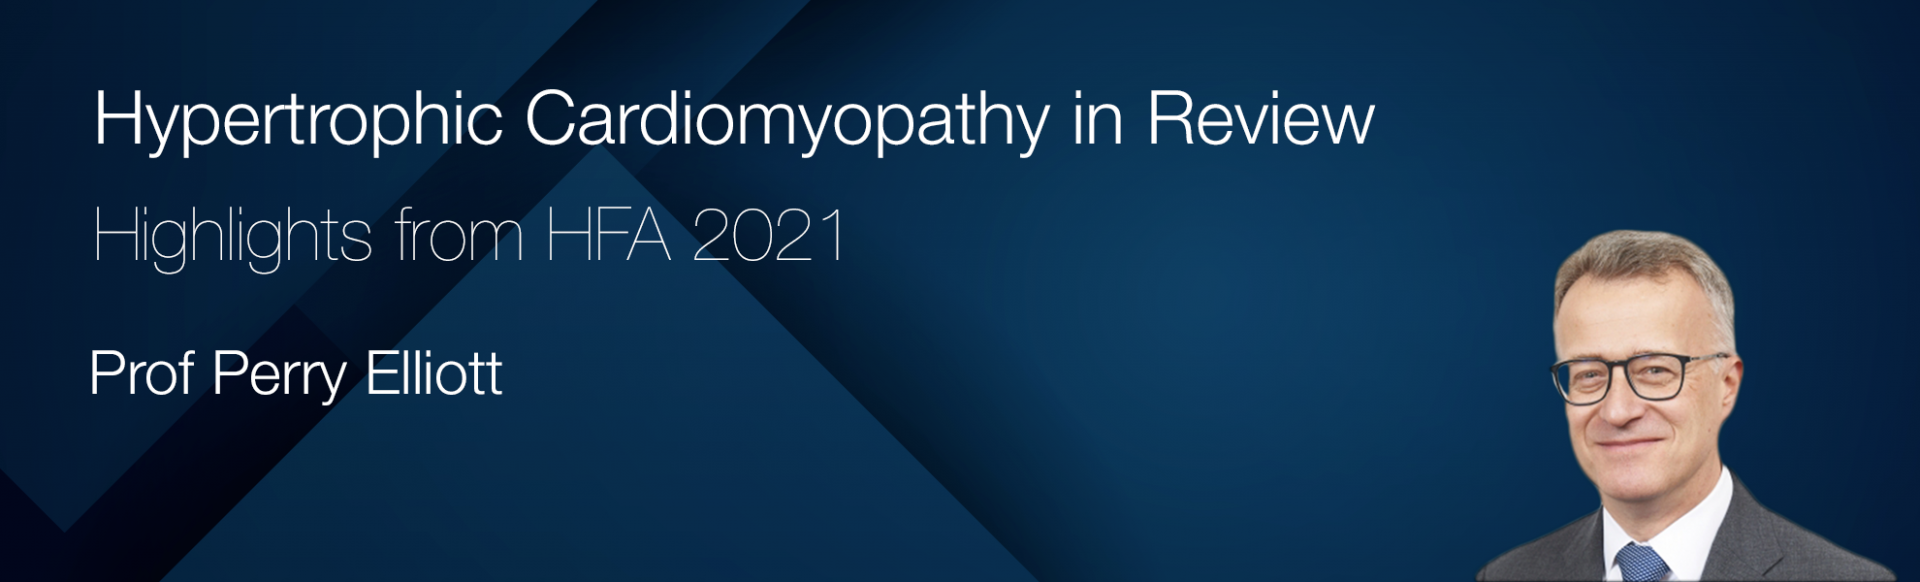 Hypertrophic Cardiomyopathy in Review: Highlights from HFA 2021